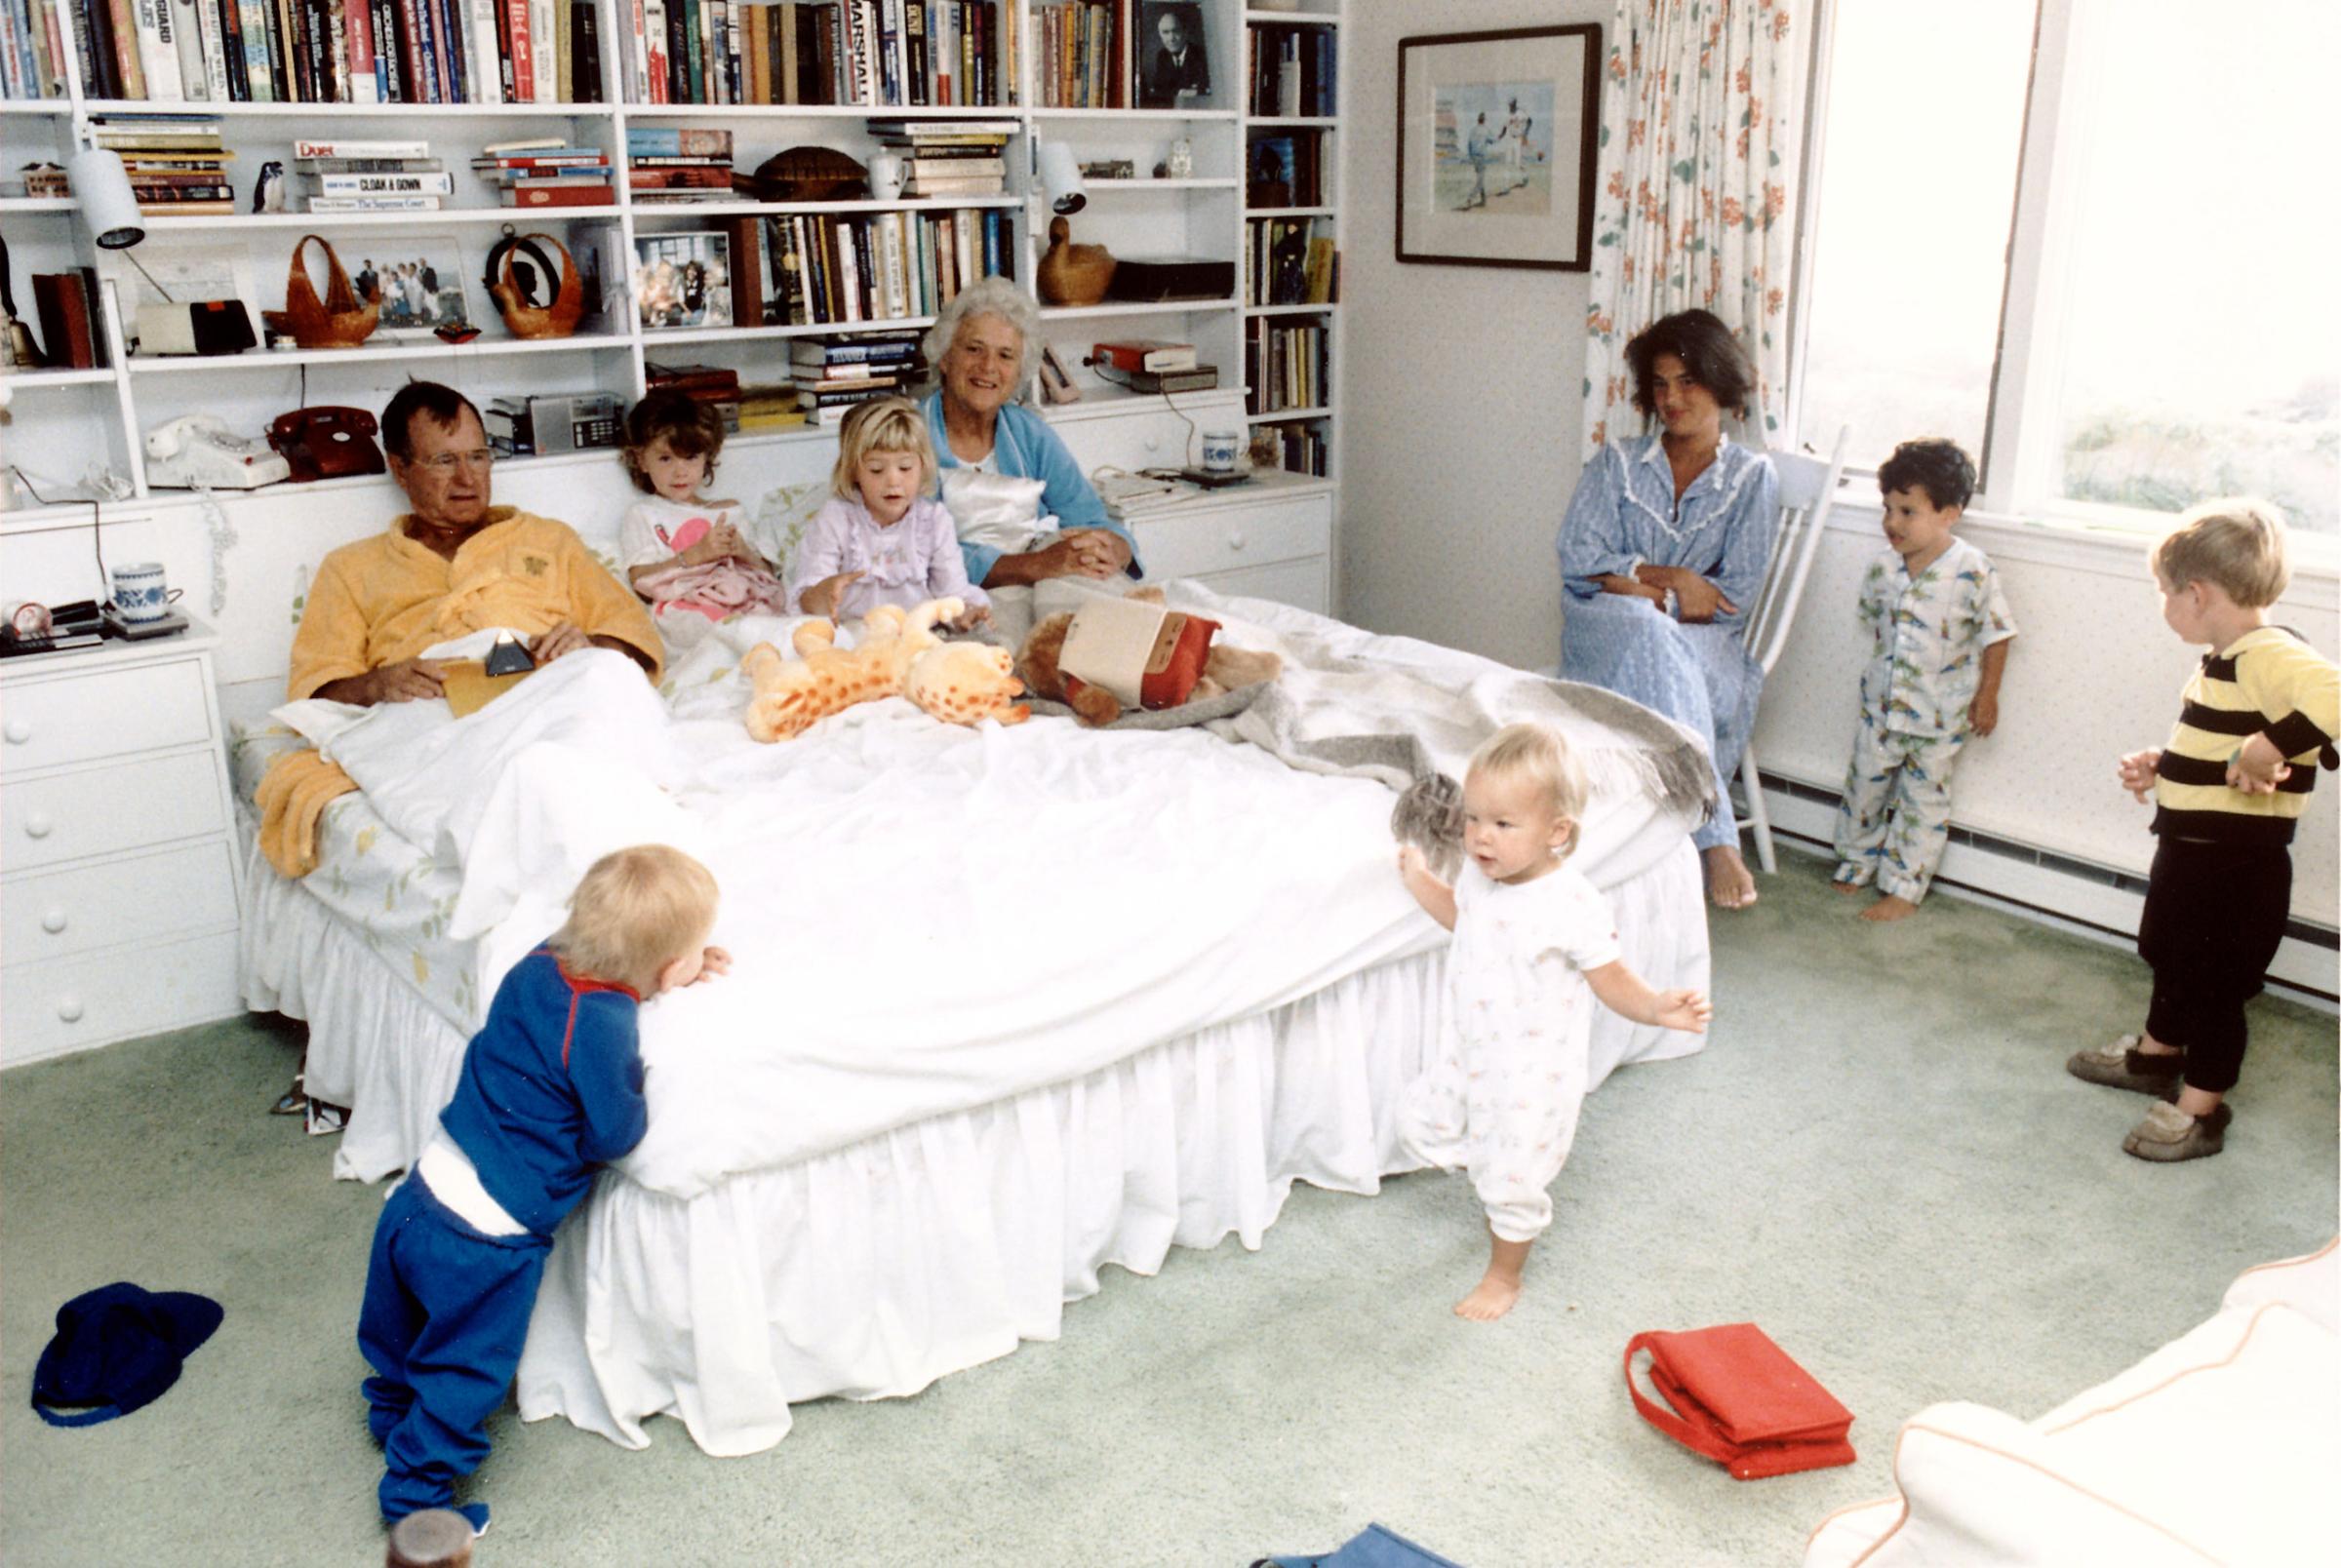 President George H.W. and Barbara Bush in bedroom get-together with their grandchildren (L-R) Pierce, twins Barbara and Jenna (in bed), Marshall, Jeb. Jr. and Sam LeBlond. 1987.